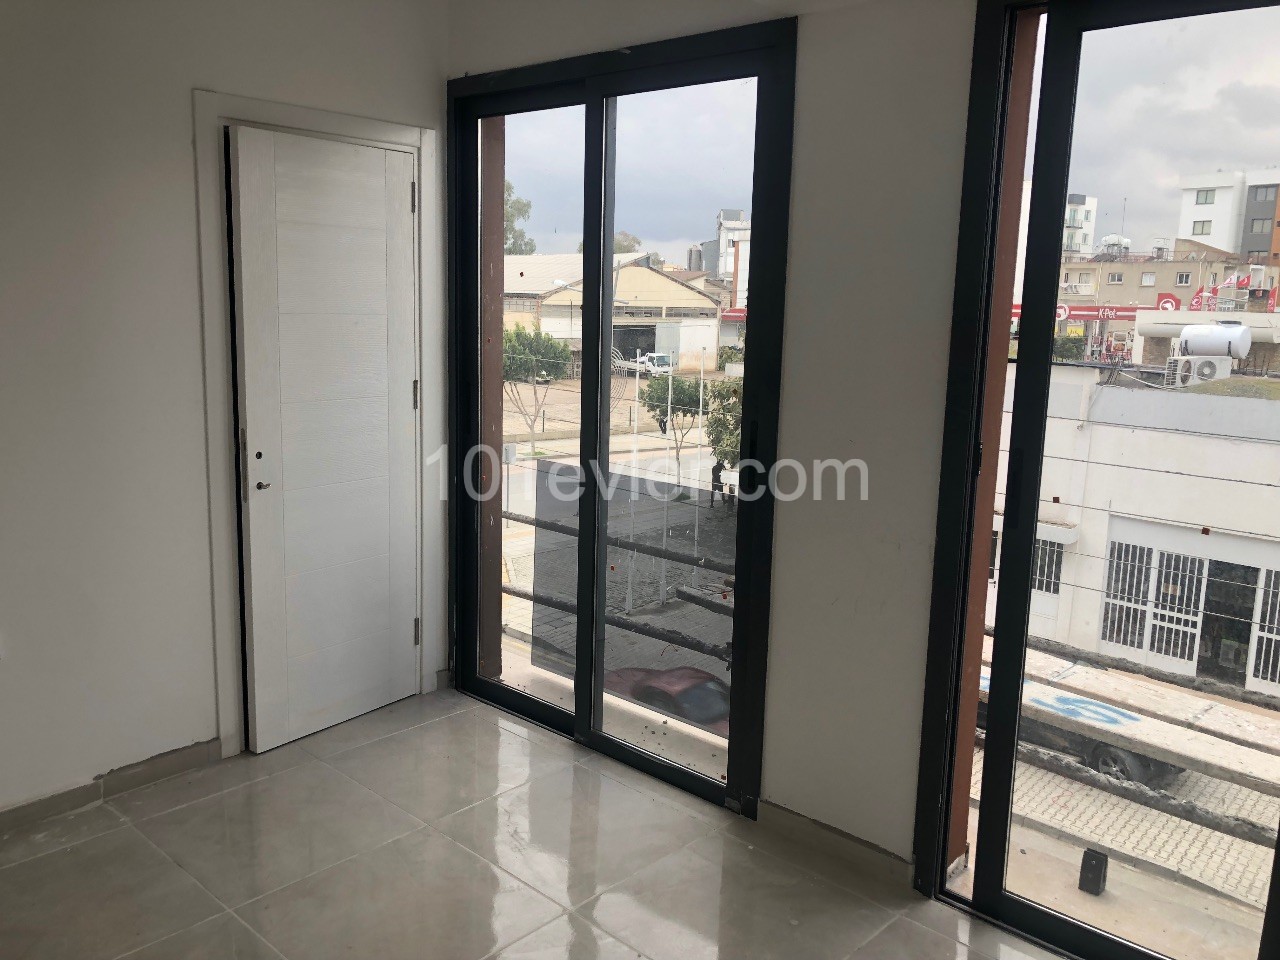 2+1 OFFICE/FLAT FOR SALE WITH COMMERCIAL PERMIT ON THE MAIN STREET IN NICOSIA/GÖNYELİ.. ** 